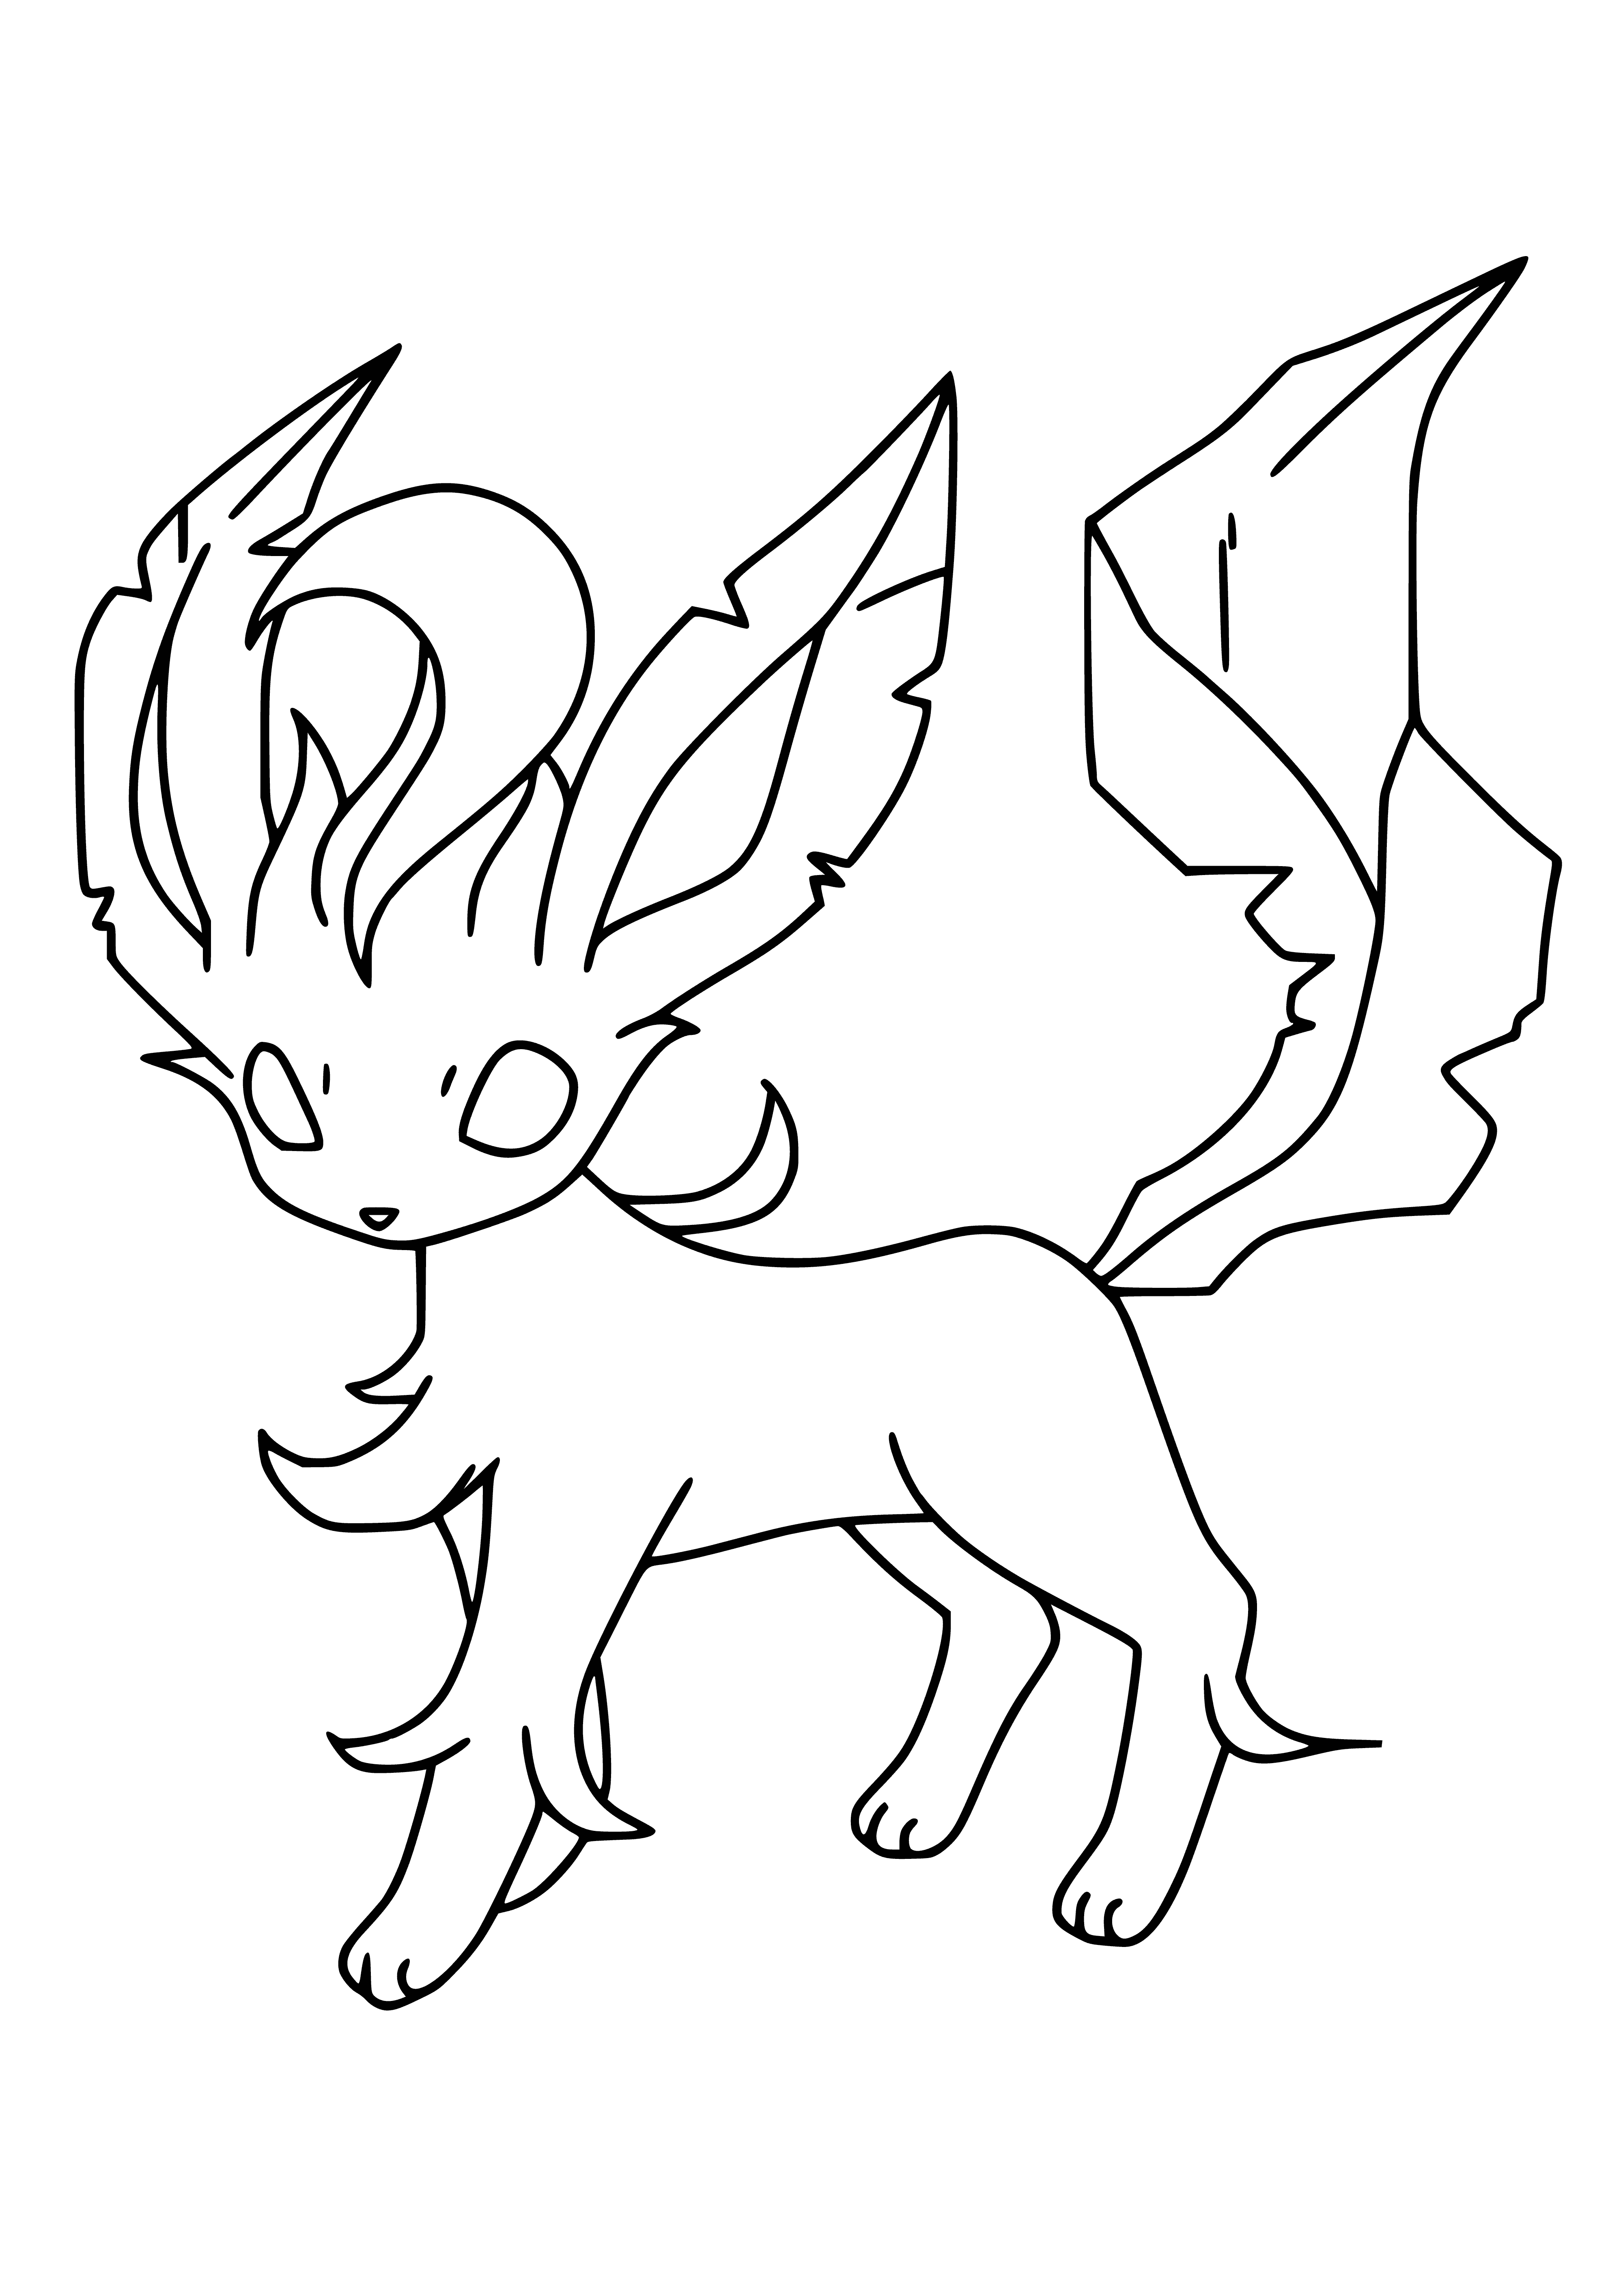 coloring page: Man with bow and arrow captures Pokémon in dense forest; loyal Absol follows, Eevee rustles in bushes, hunter is quick, captures Pokémon before it escapes!